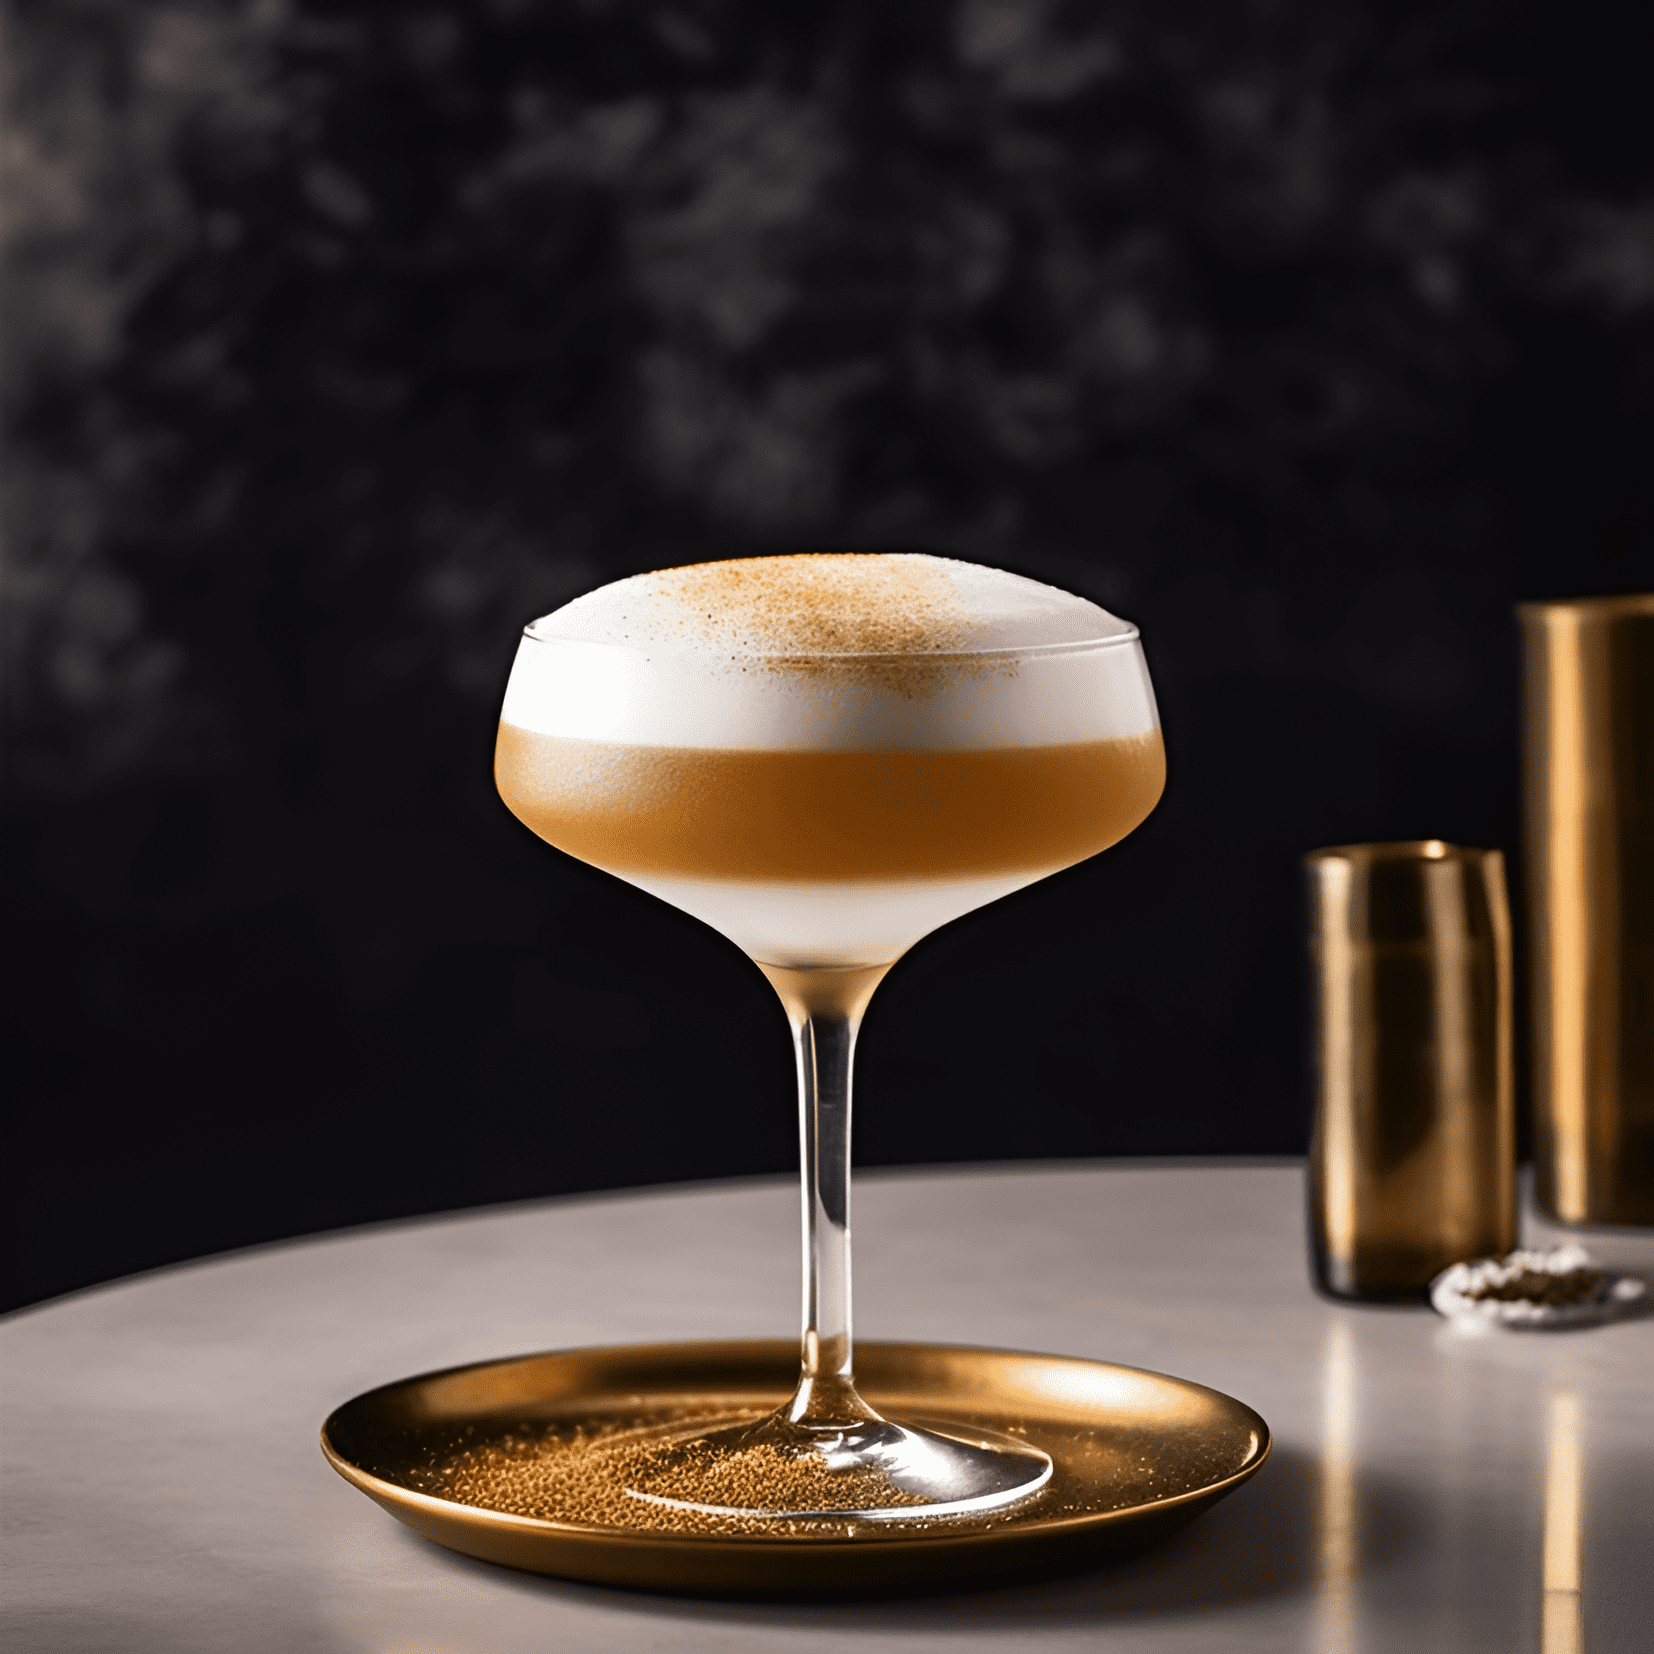 Utopia Cocktail Recipe - The Utopia cocktail is a harmonious blend of sweet, sour, and slightly bitter flavors, with a smooth and velvety texture. The taste is both refreshing and invigorating, leaving a pleasant warmth in the mouth.